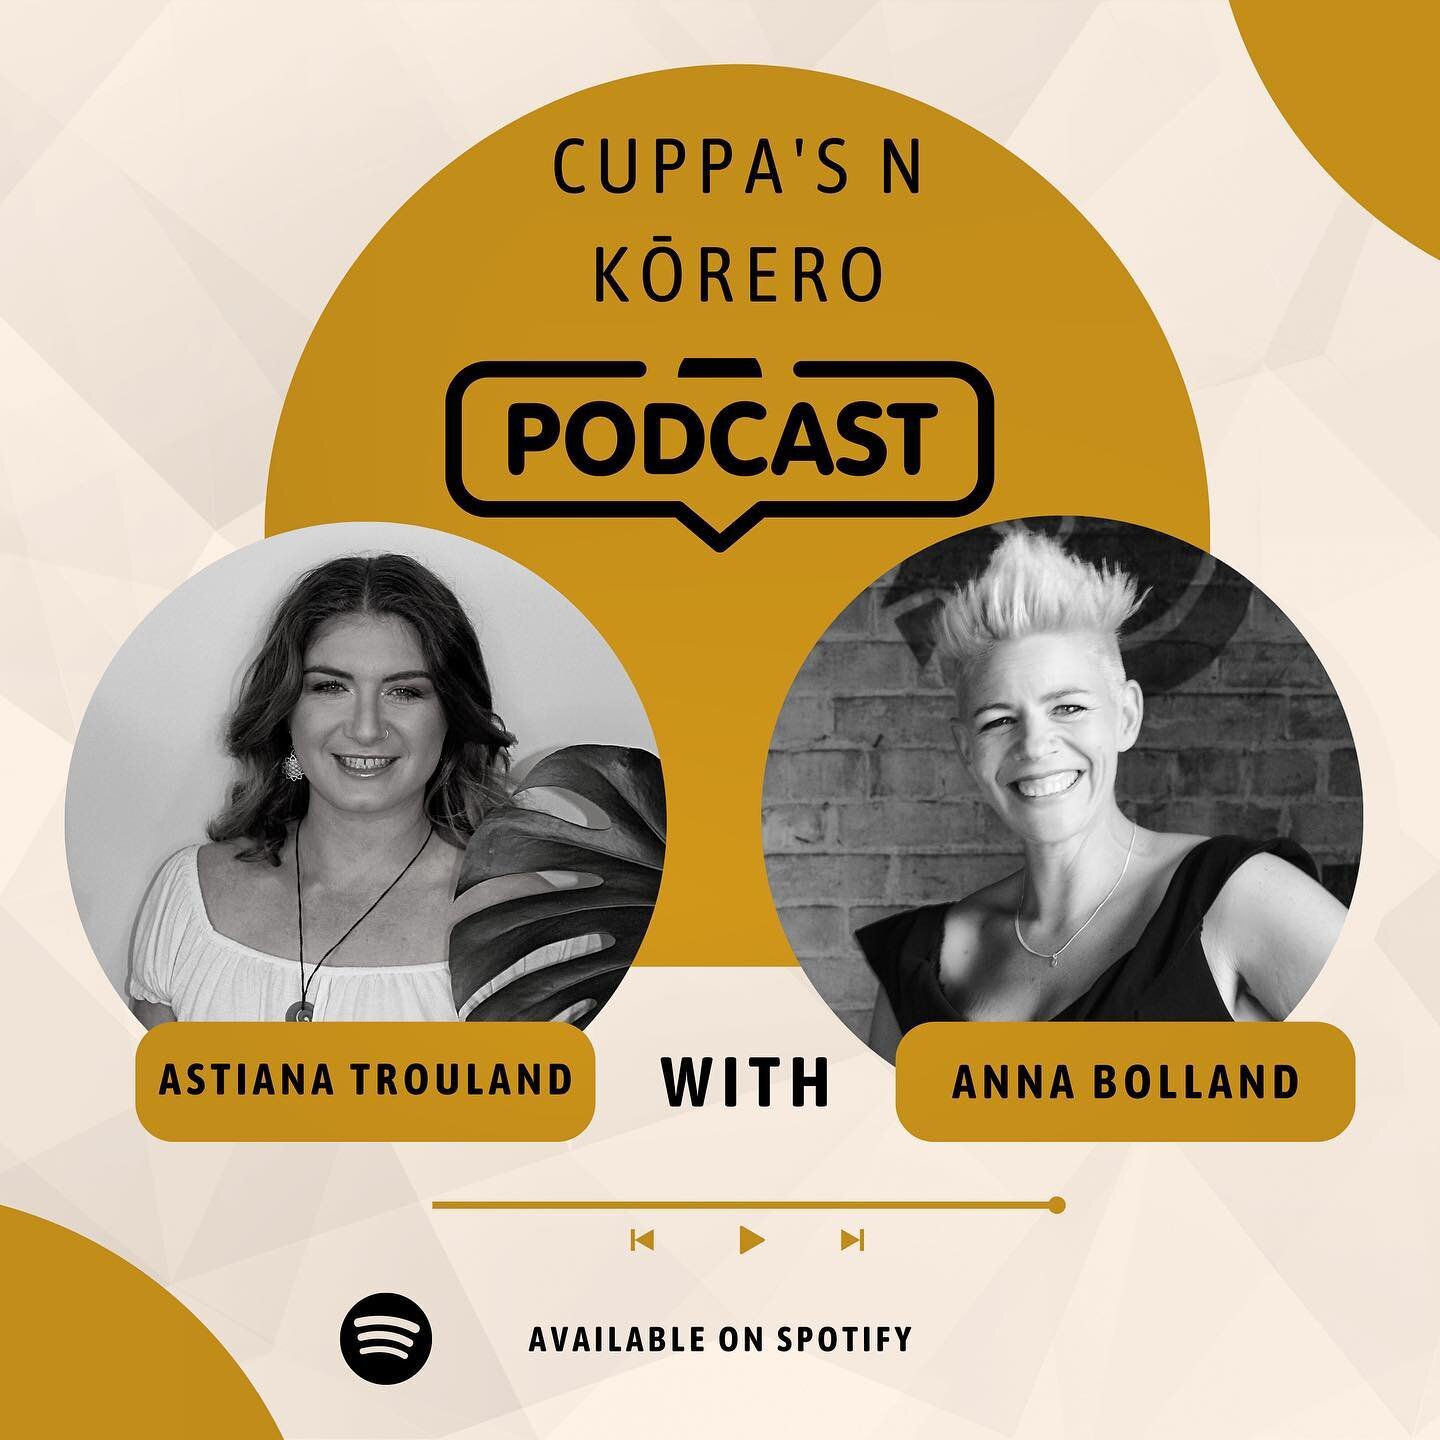 Flaunting change in a world that fear it 💥

This months episode featuring @anna.bolland is a riff on reality as we know it. 

Leadership development is finally making traction here in Aotearoa with the help of legendary leaders like Anna!

Thank you